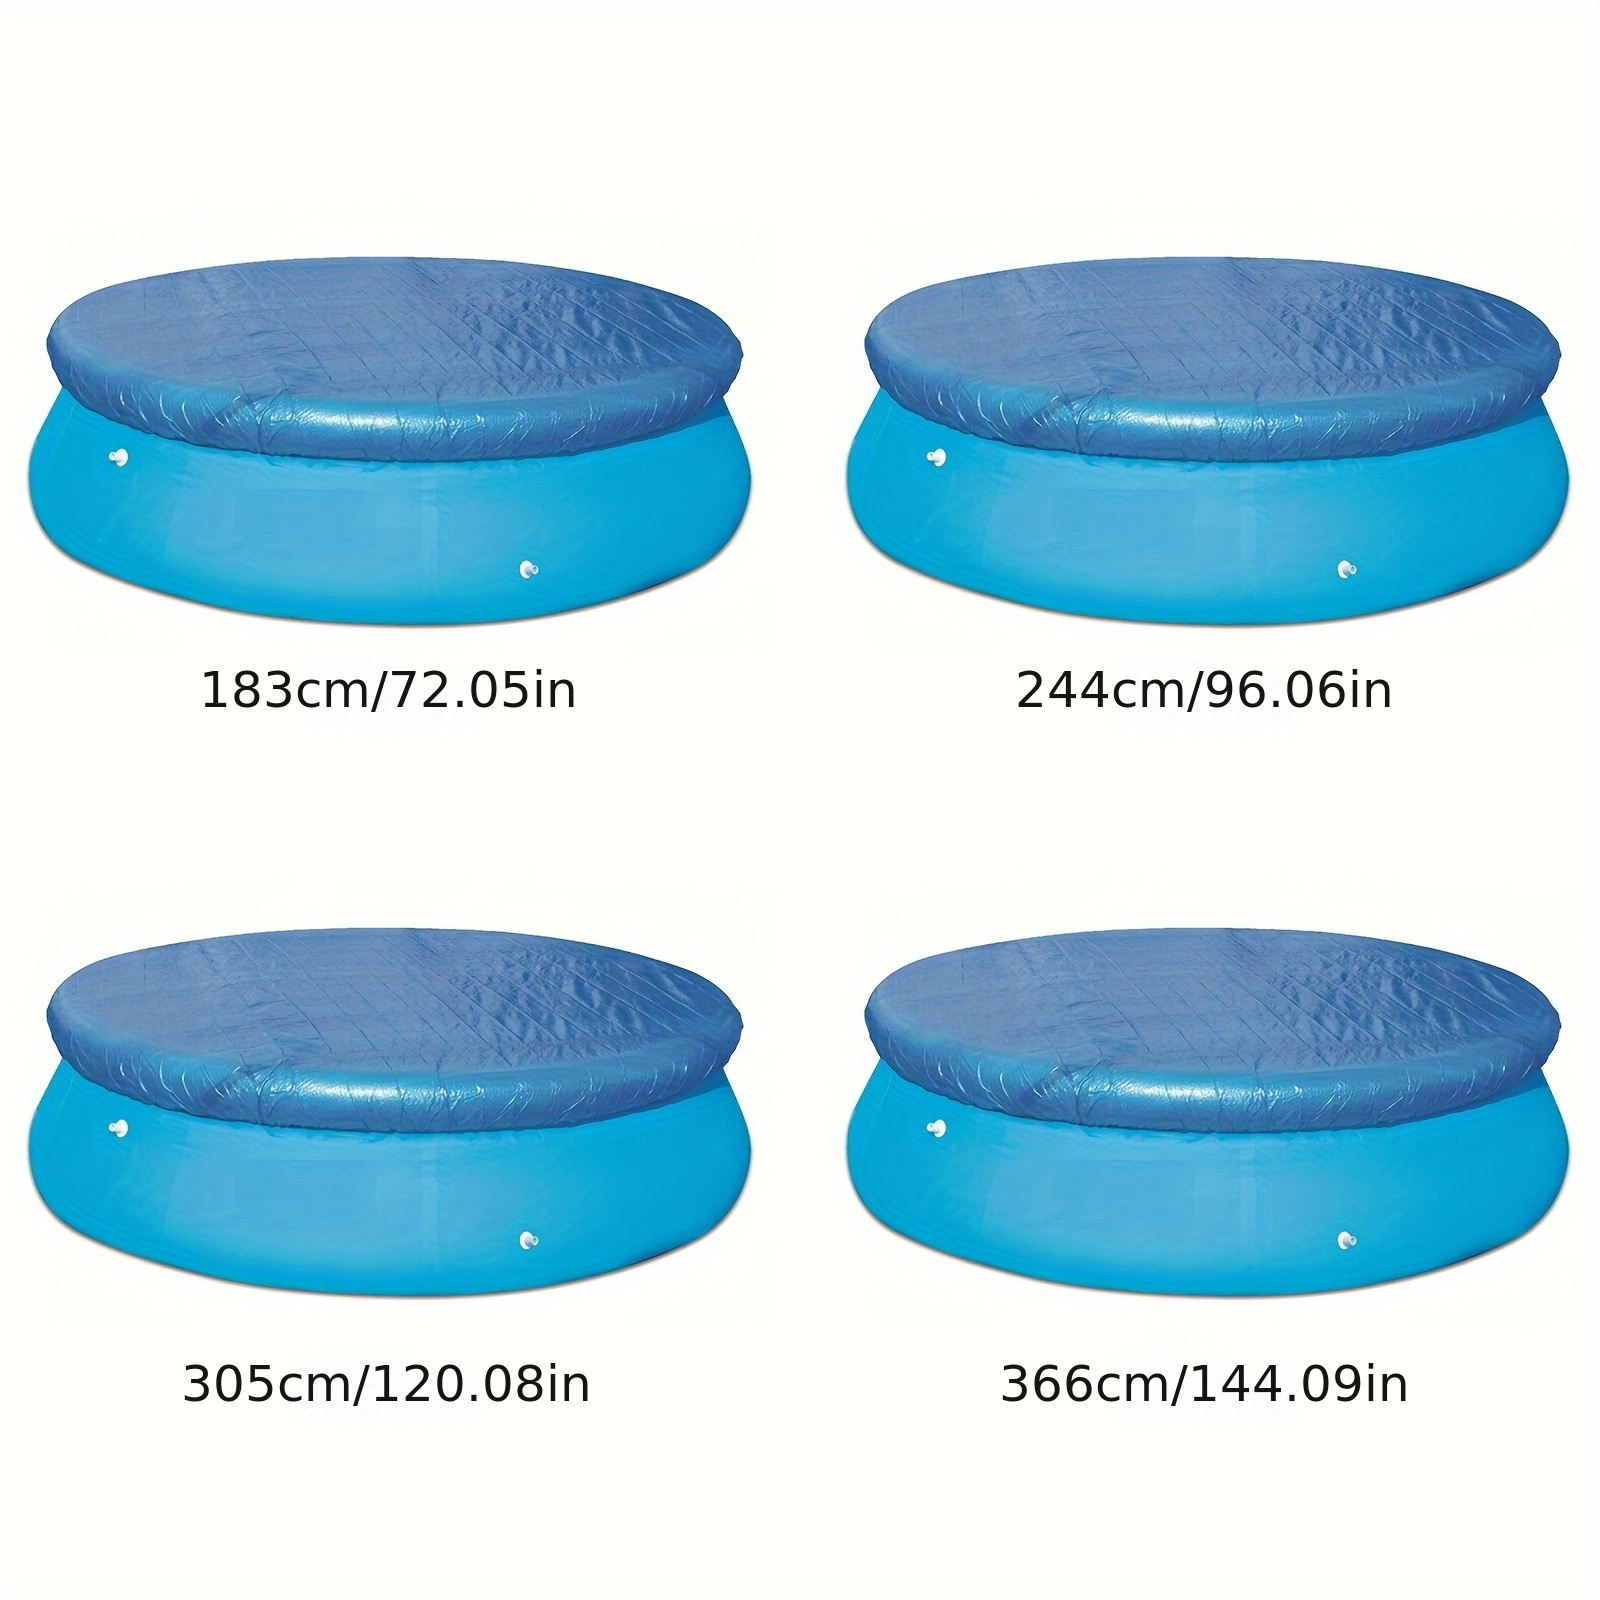 

Round Swimming Pool Cover - Waterproof Pe Dustproof Rain Cover For Outdoor Pools - Durable And Uv Resistant Protection Cover